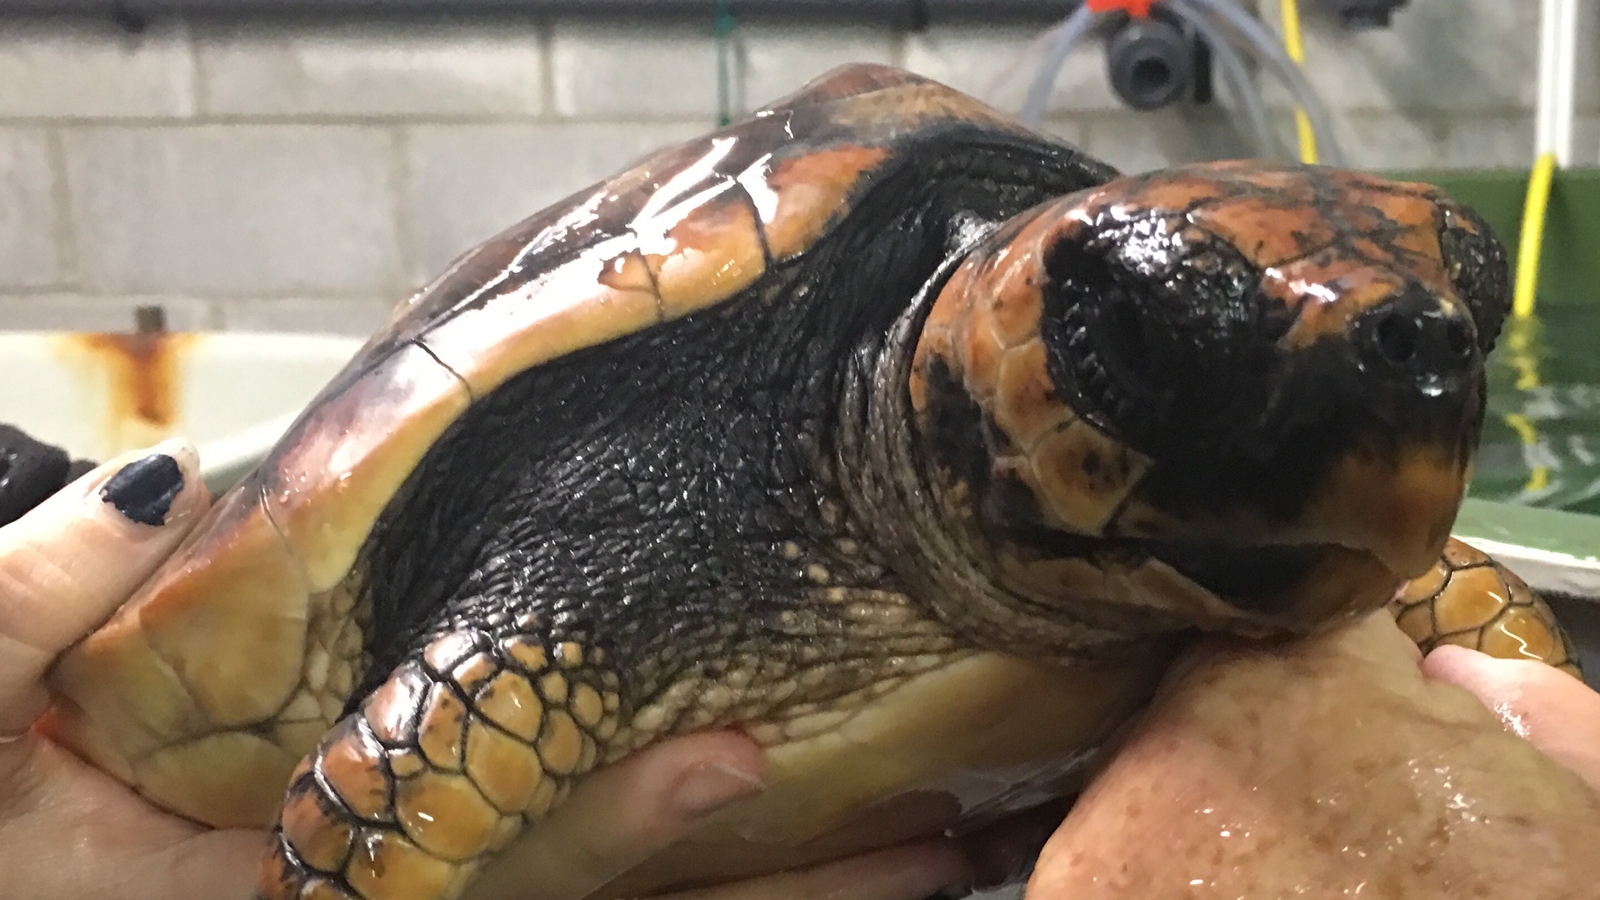 Miracle' Miami turtle being looked after in Dingle after washing up on  Irish beach